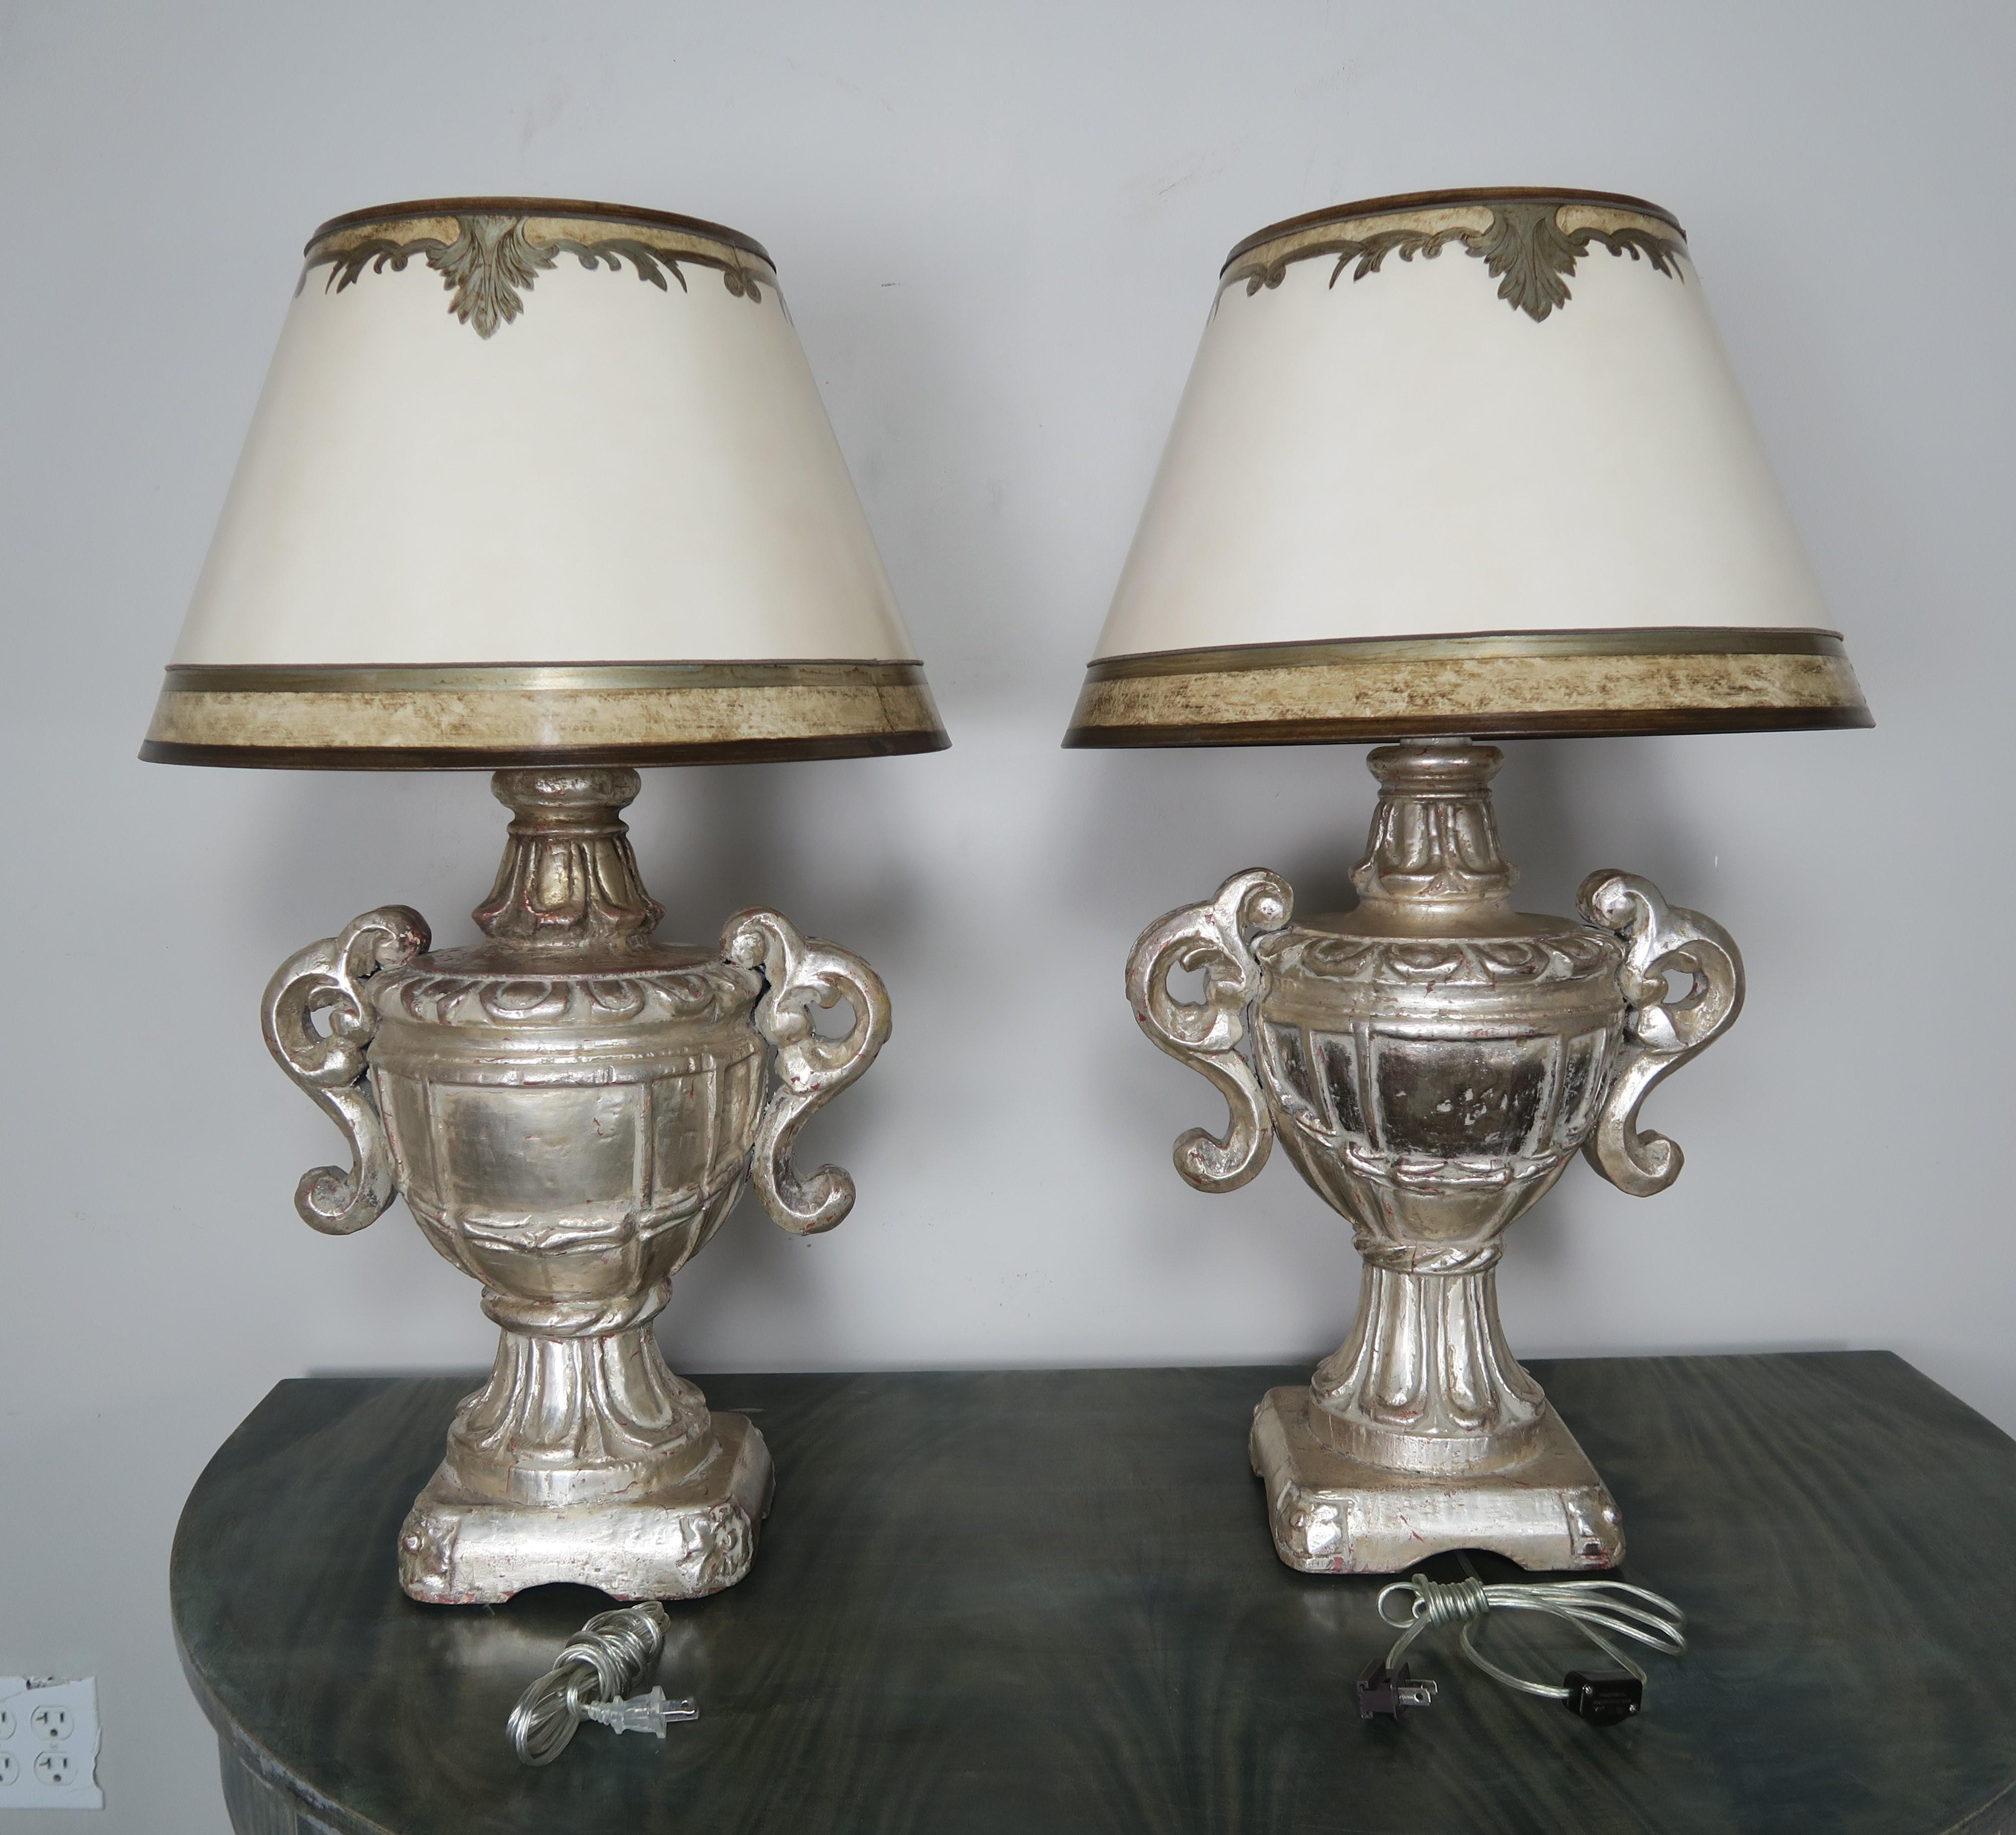 Rococo Italian Carved Silvered Lamps with Parchment Shades, a Pair